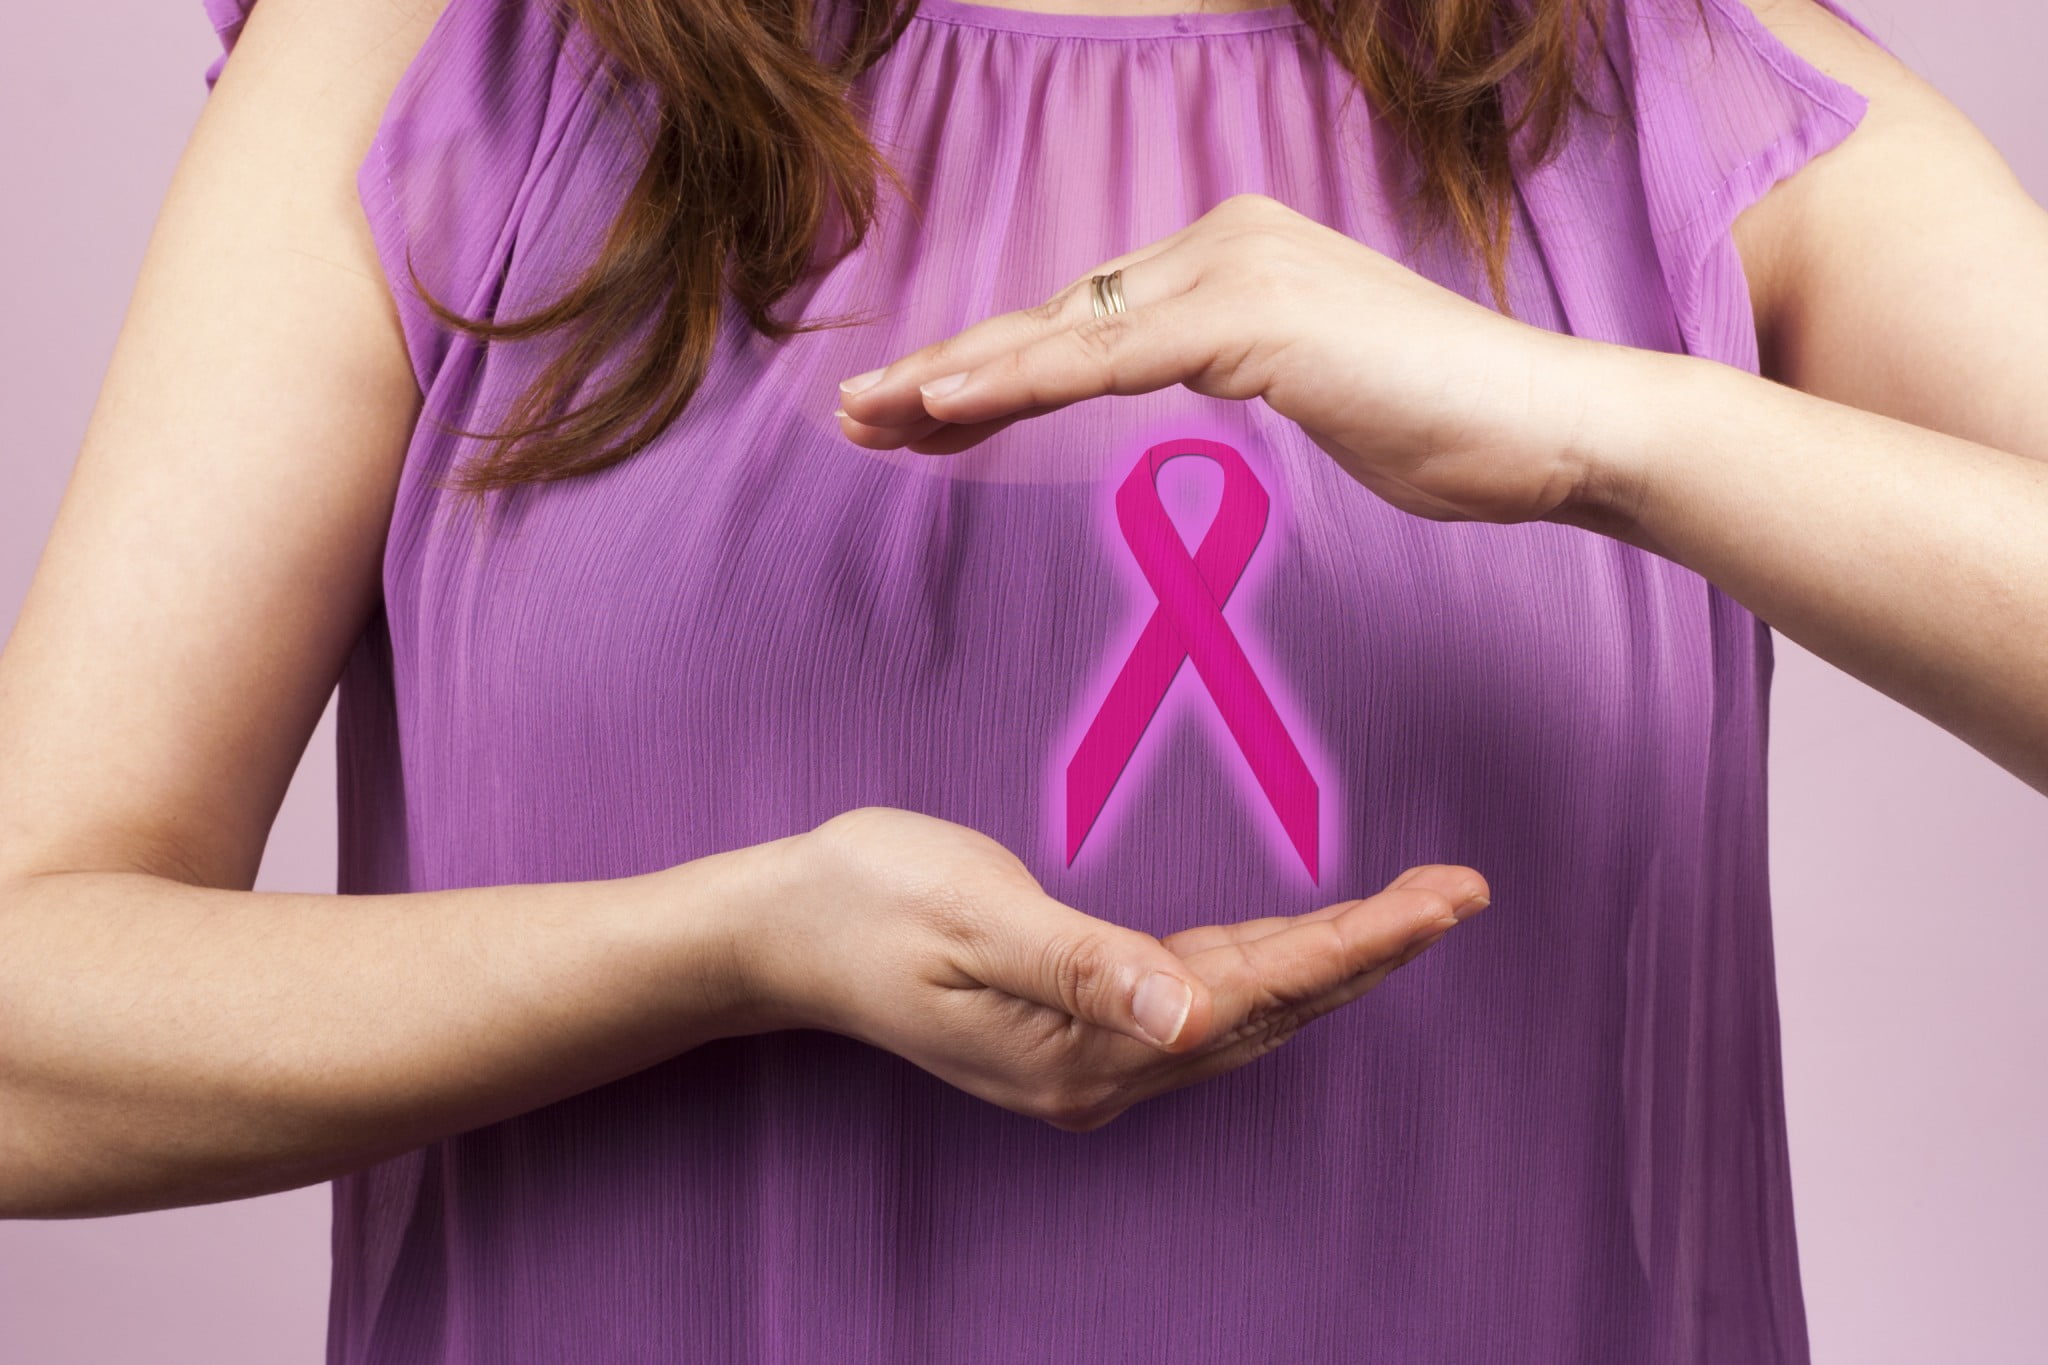 BreastScreen: woman in pink top holds pink ribbon